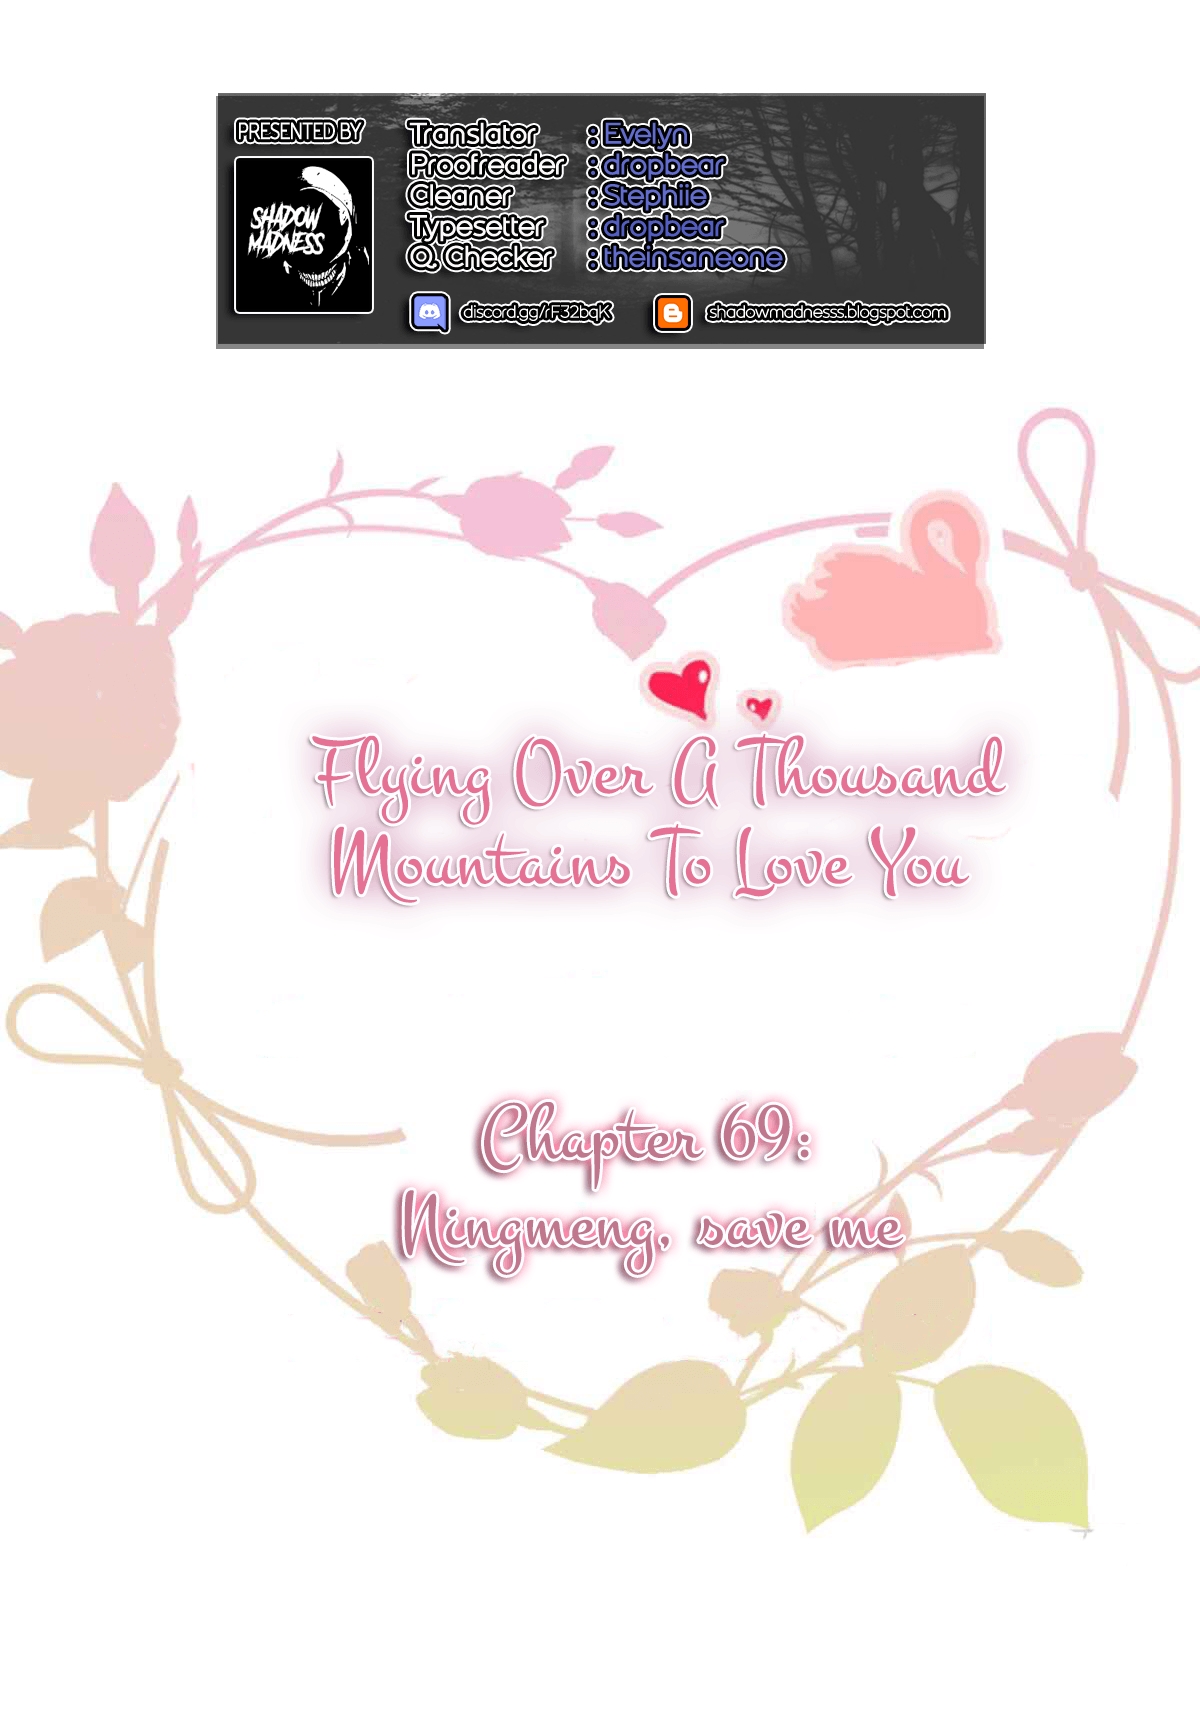 Flying Over a Thousand Mountains to Love You Ch. 69 Ningmeng, save me